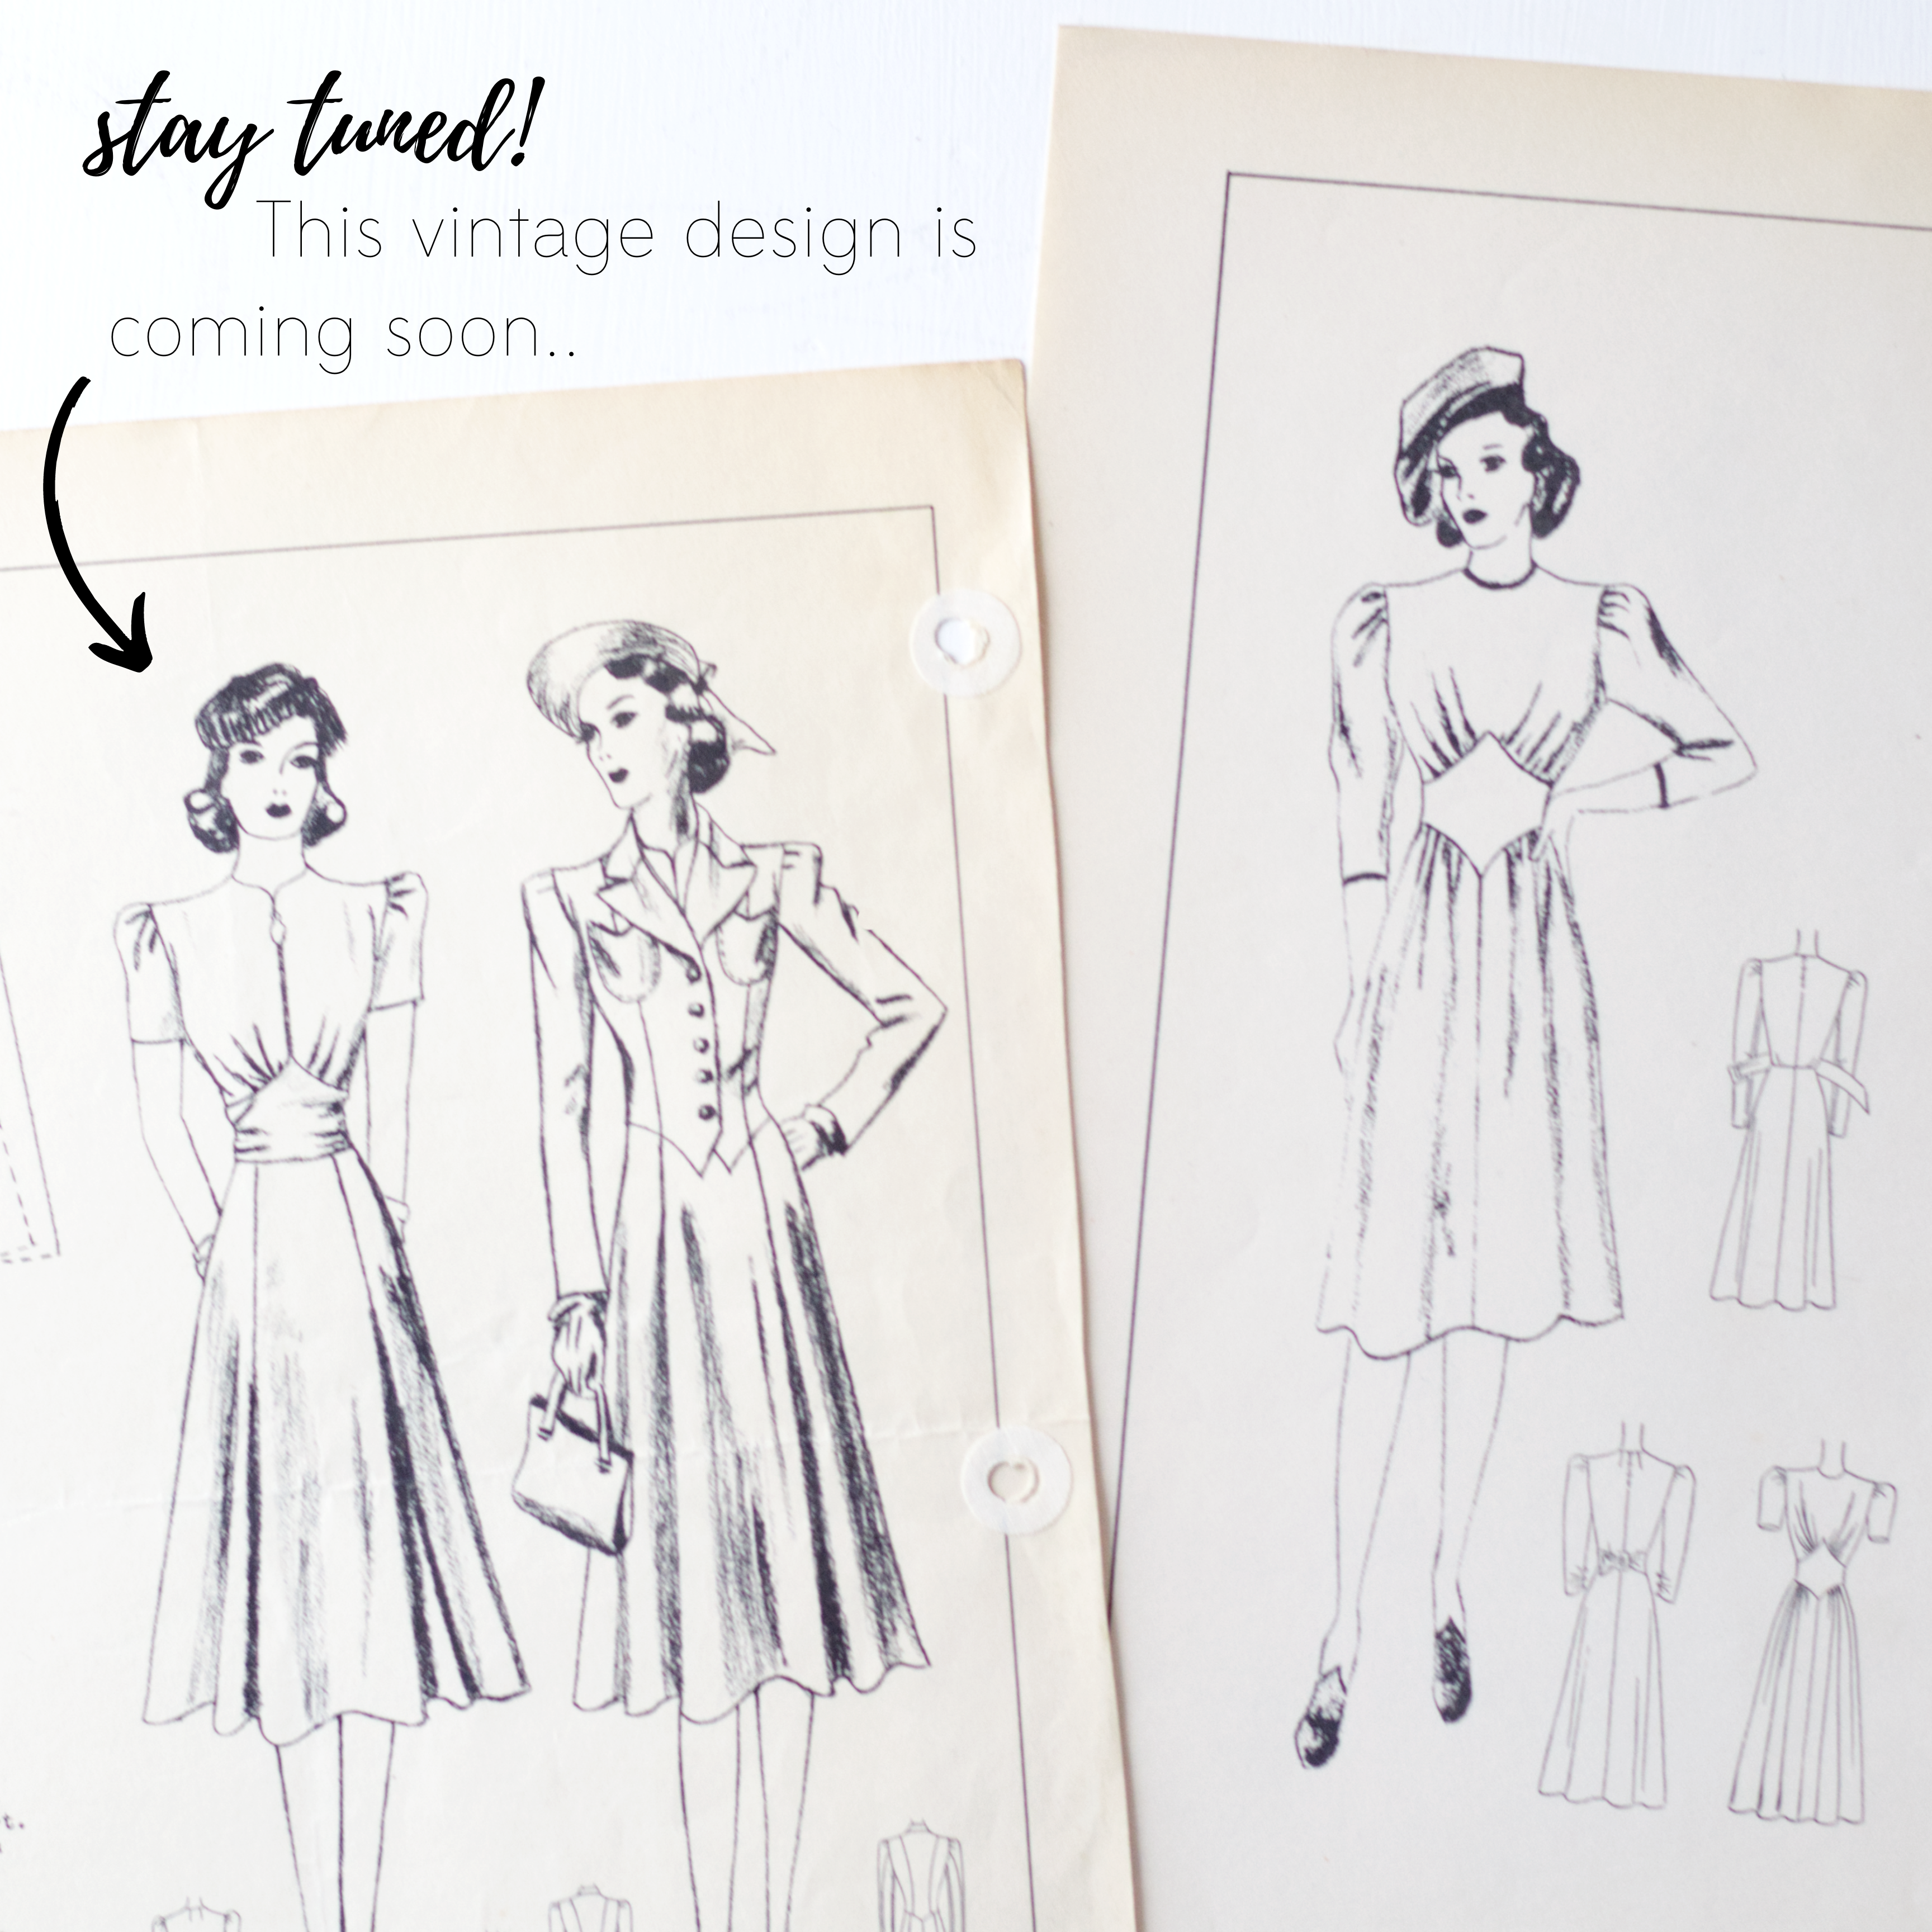 Vintage sewing pattern inspiration: New design coming soon!